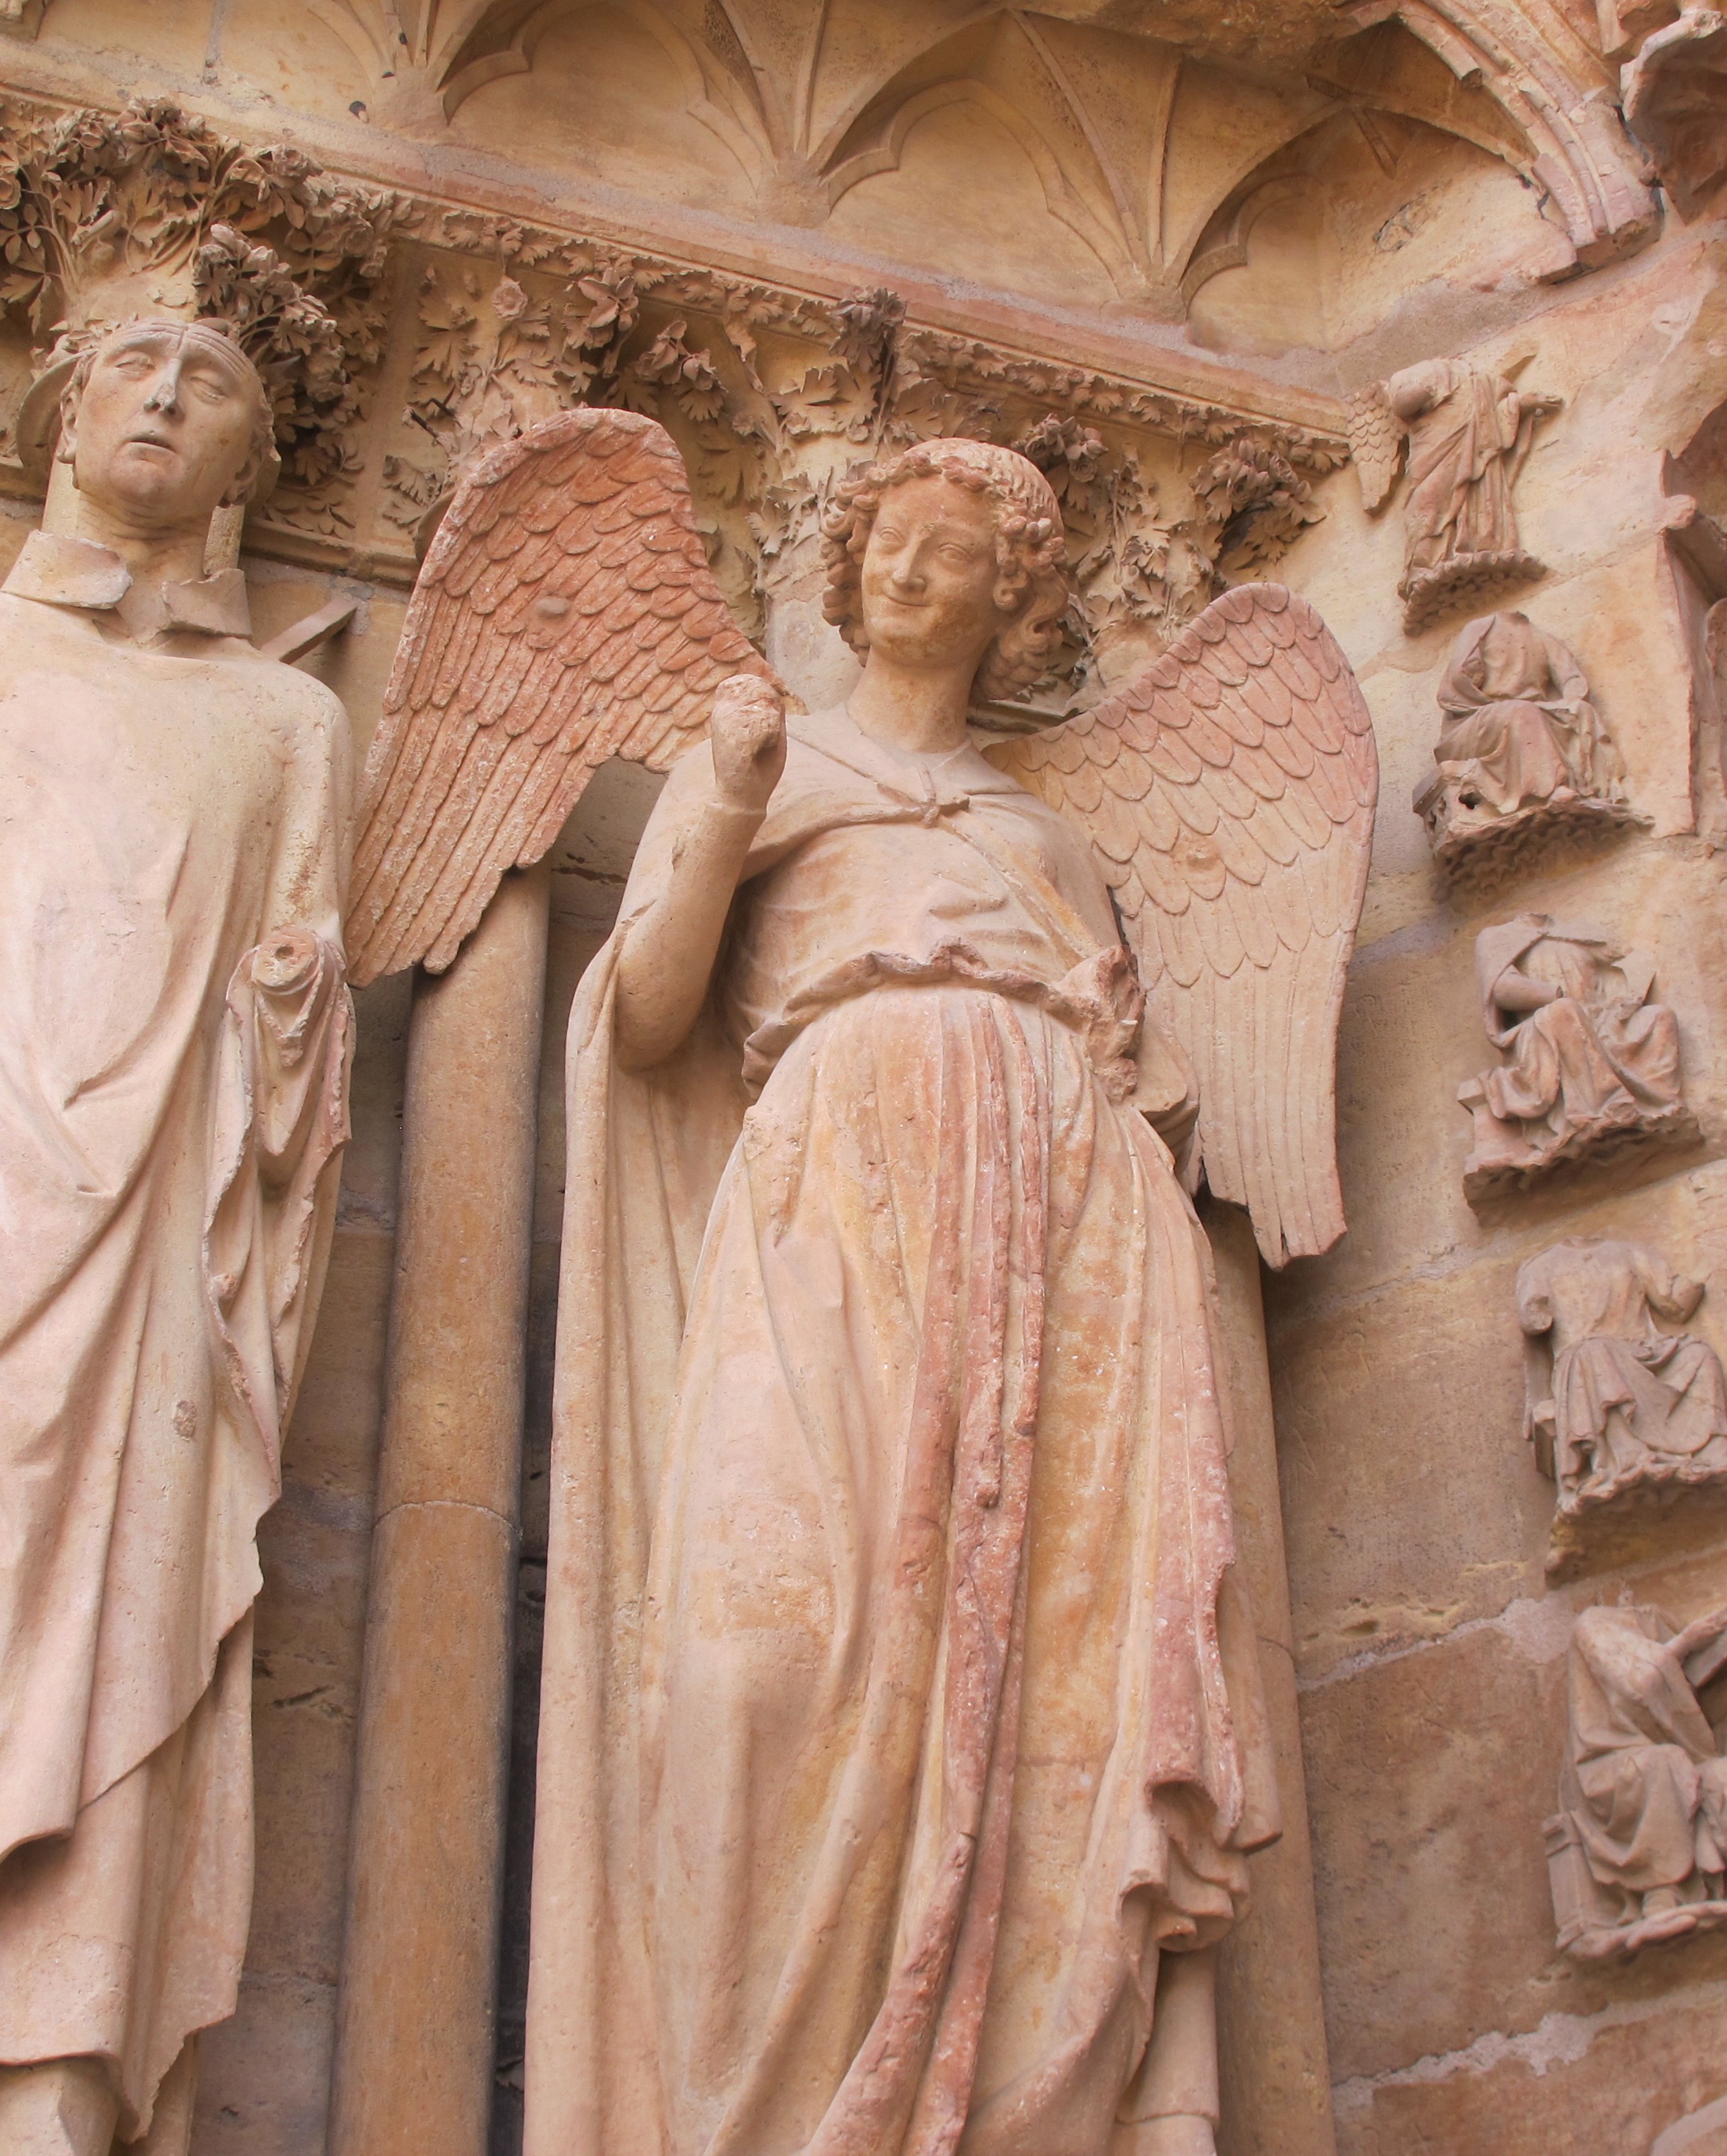 The much loved "Smiling Angel" greets visitors at the entrance to the Cathedral Notre Dame.